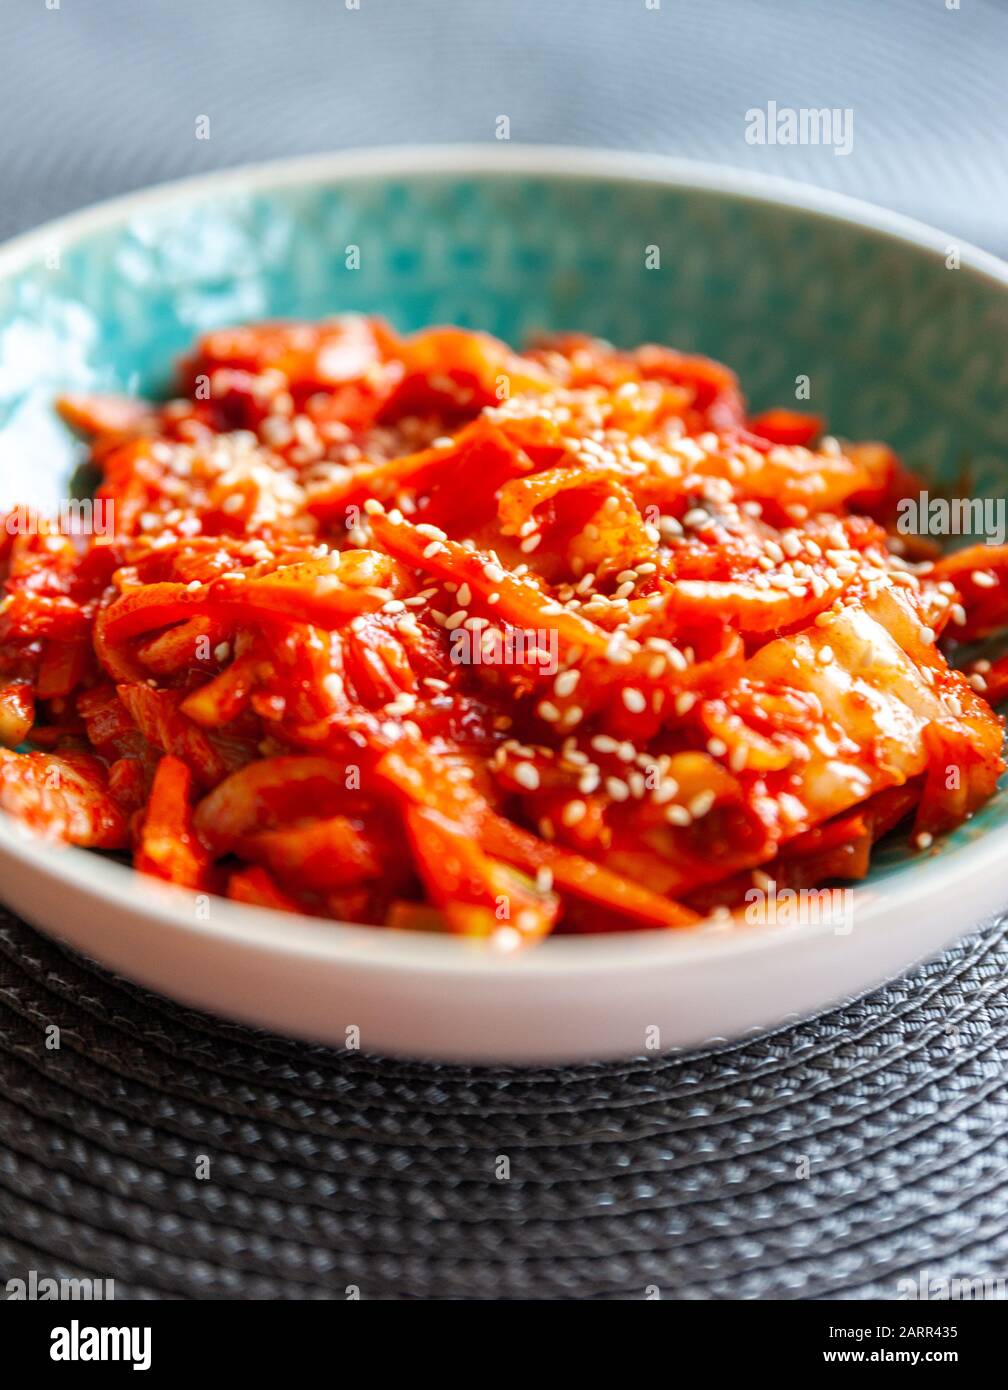 Traditional Korean kimchi. Fermented Chinese cabbage. Stock Photo